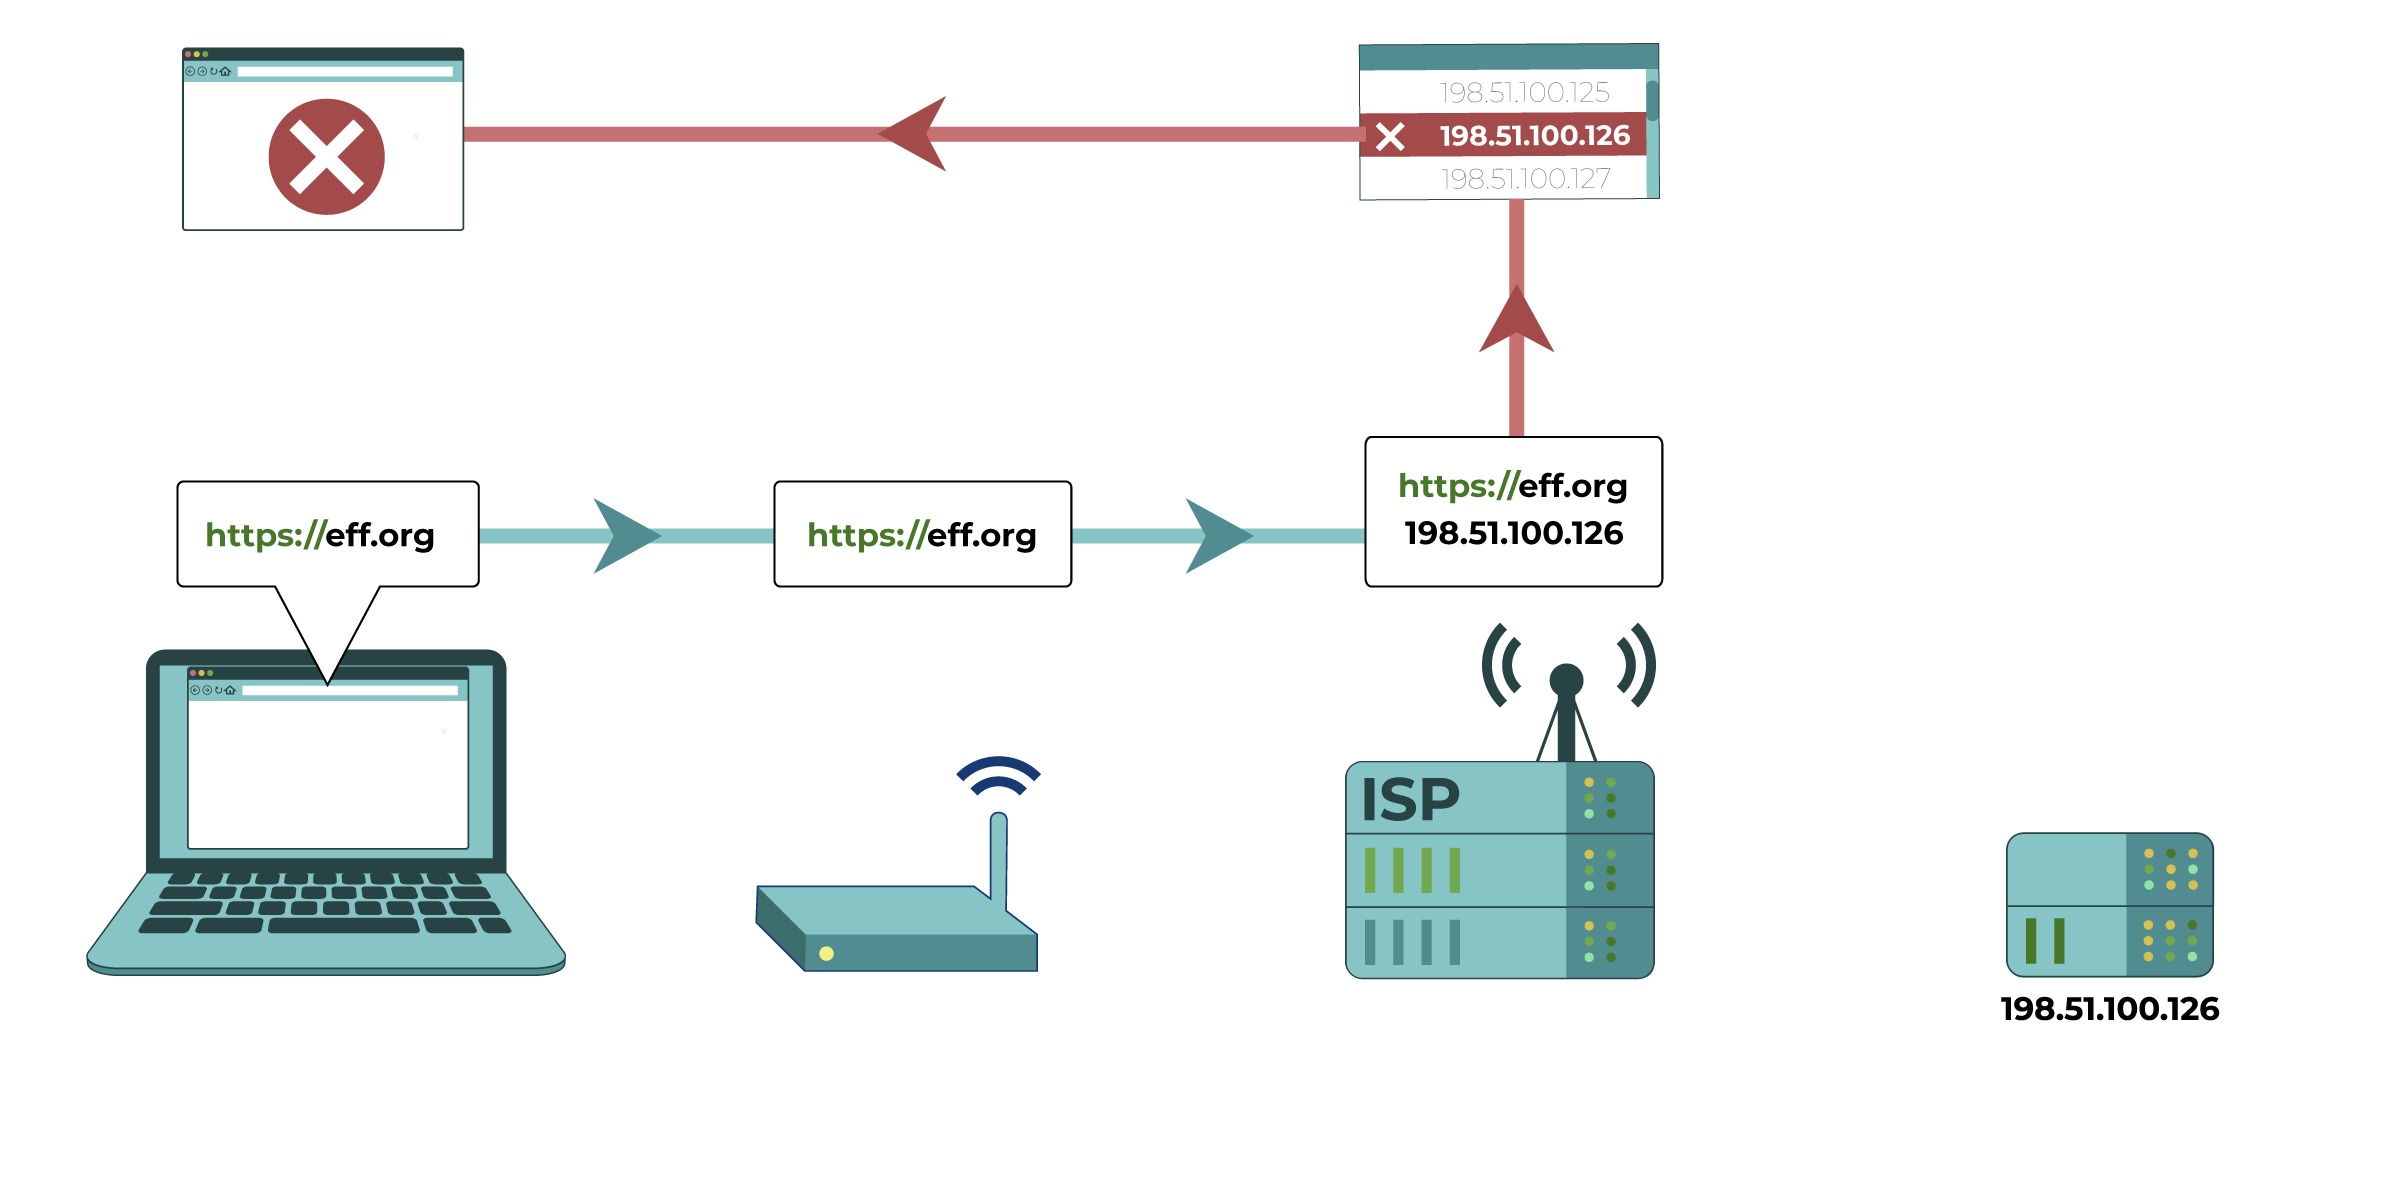 In this diagram, the Internet Service Provider cross-checks the requested IP address against a list of blocked IP addresses. It determines that the IP address for eff.org matches that of a blocked IP address, and blocks the request to the website.